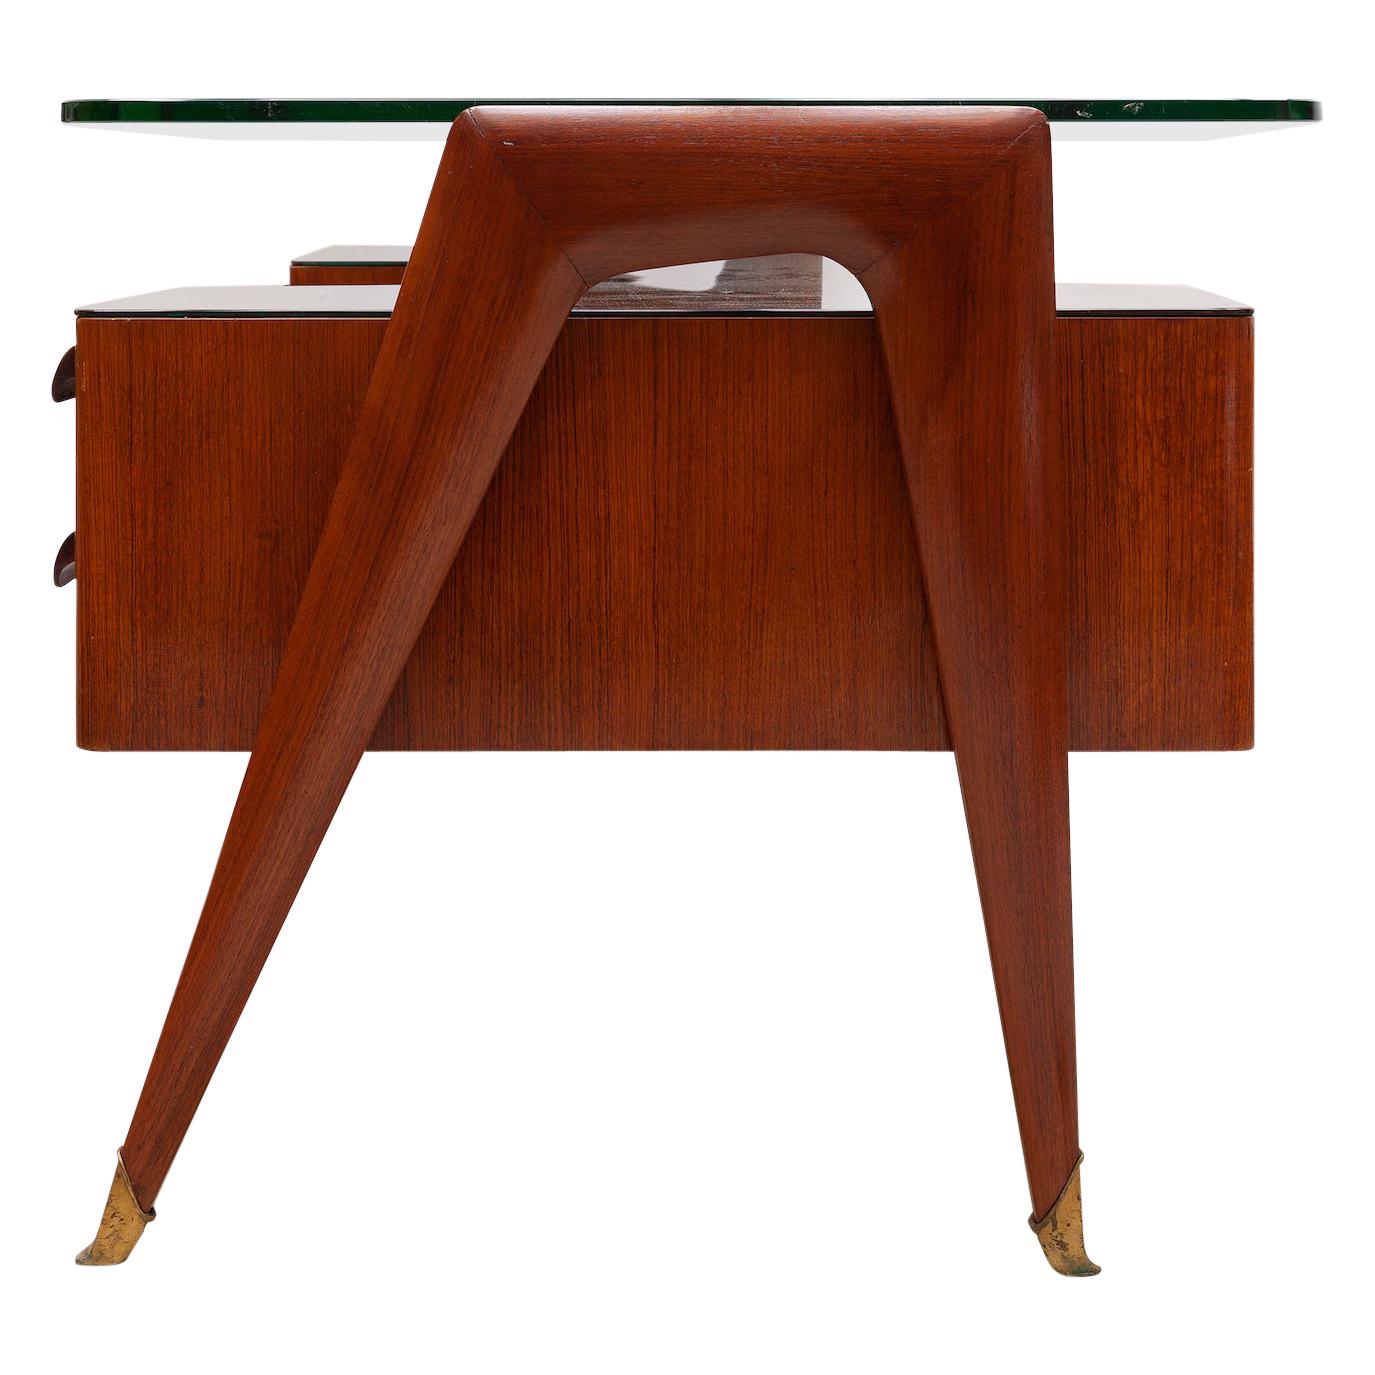 Vintage Mid-Century Modern Italian desk in presidential style designed by Vittorio Dassi, 1950s. Beautiful walnut construction with intricate inlay. Four dovetail drawers with key. Brass capped feet. Black glass under layer with a floating clear